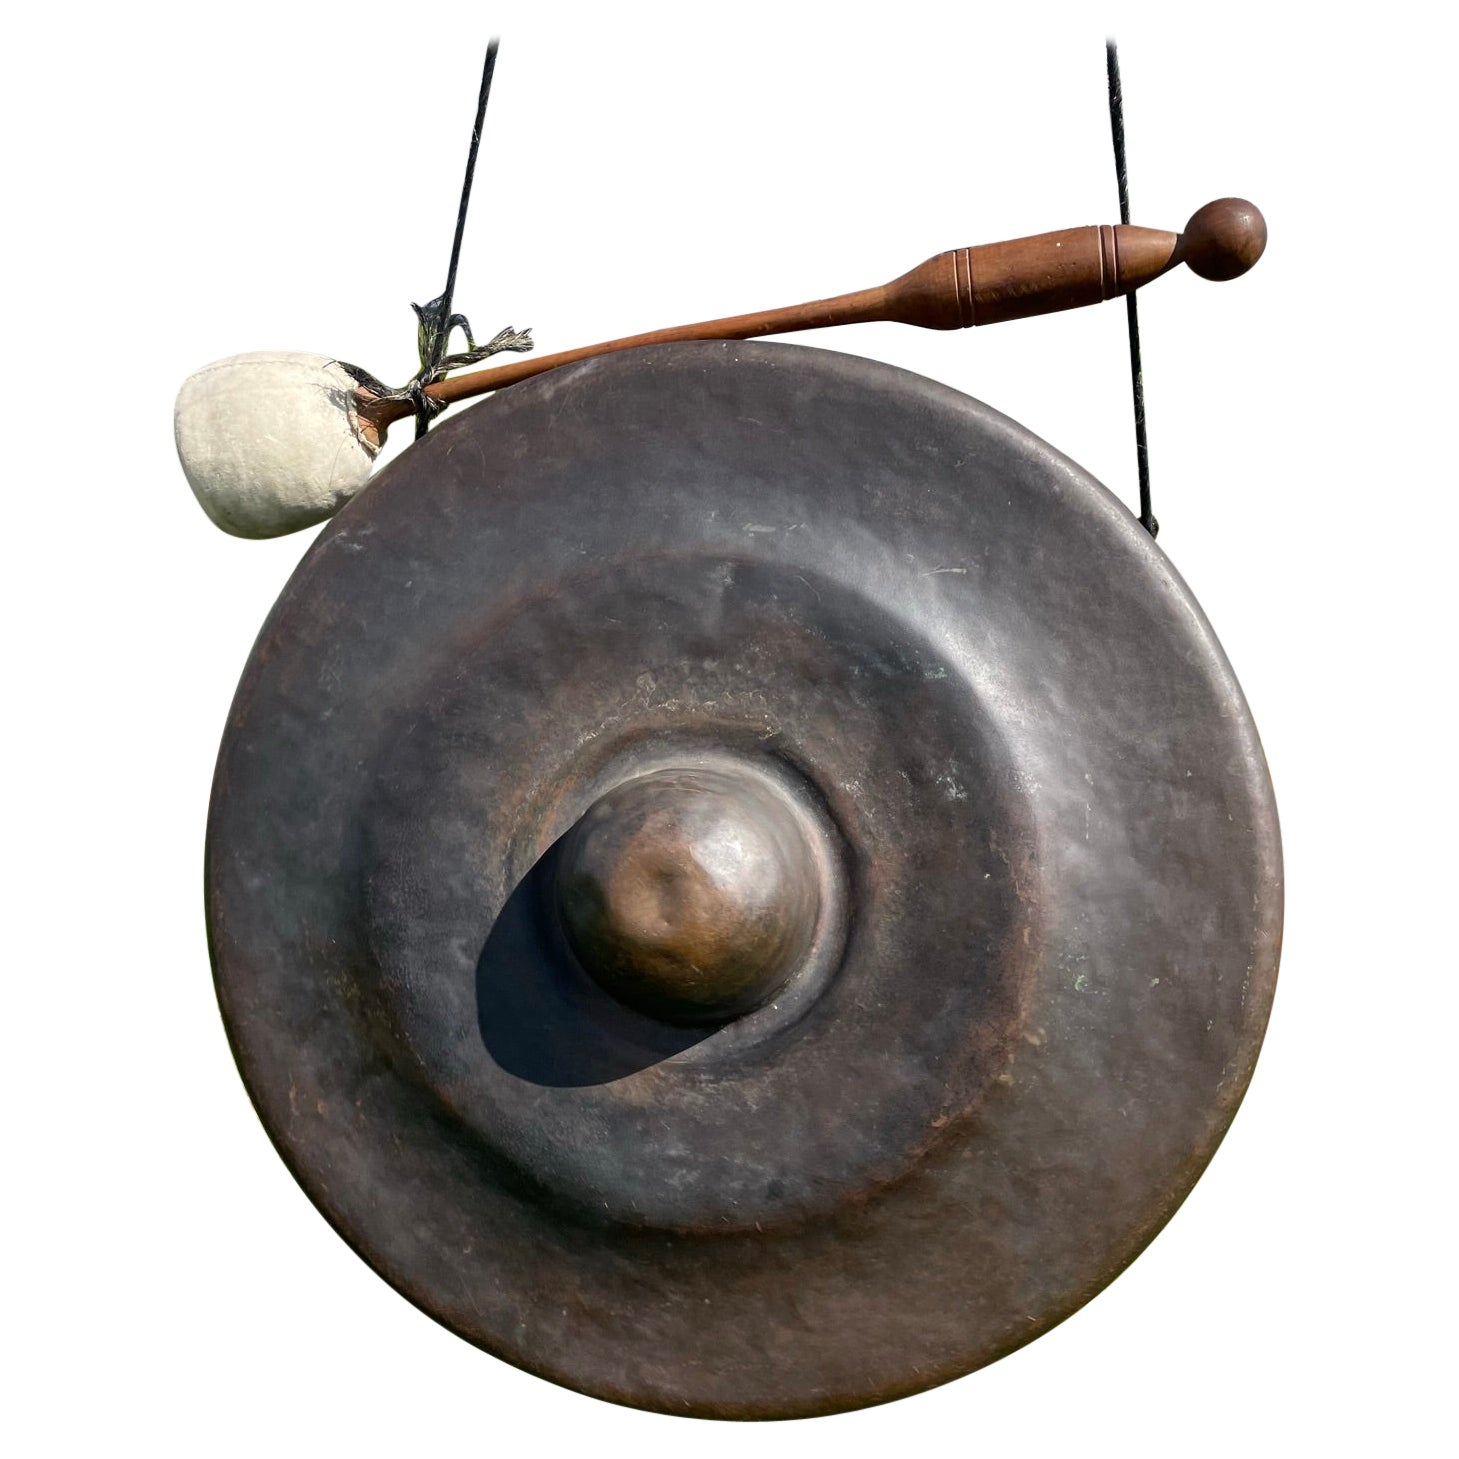 Antique Gong - 17 For Sale on 1stDibs | cambodian gong, antique gongs for  sale, antique chinese gong